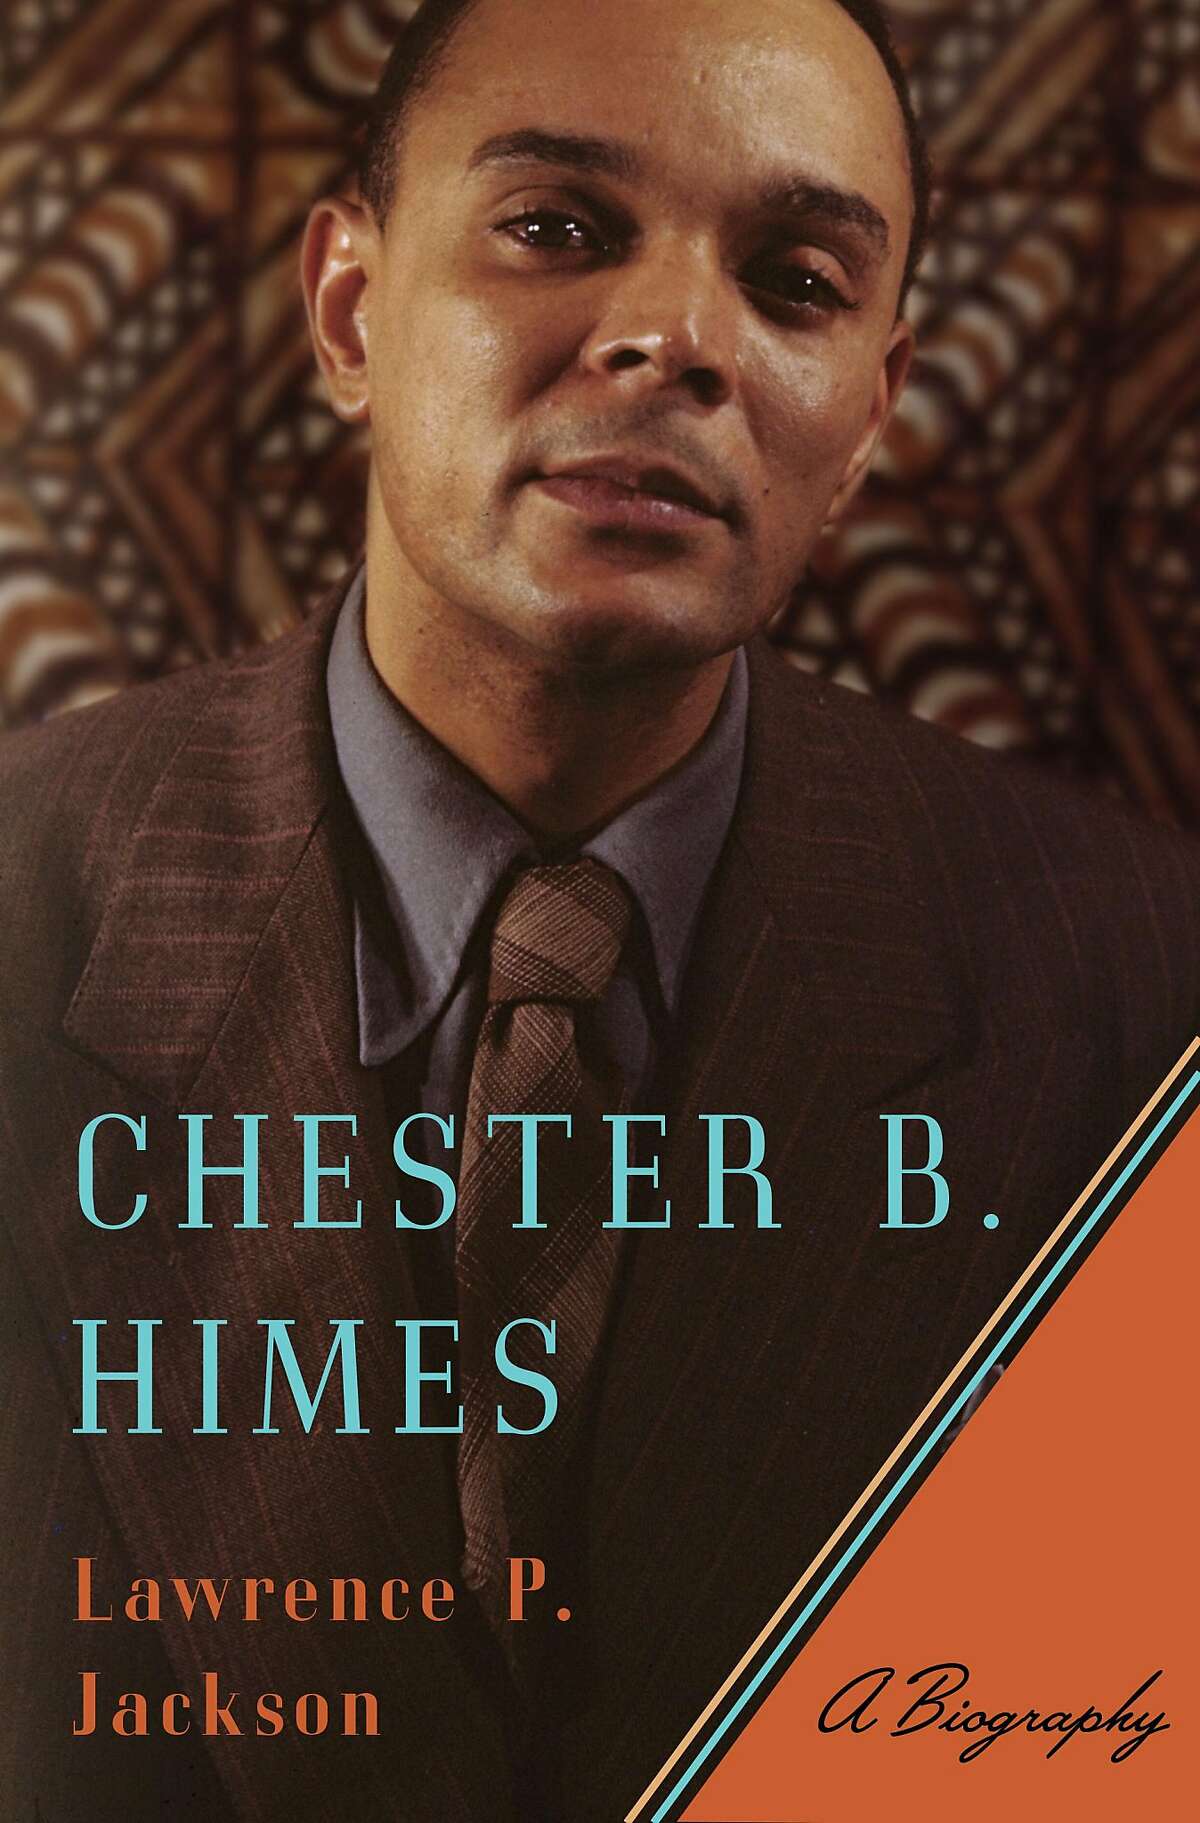 "Chester B. Himes: A Biography"